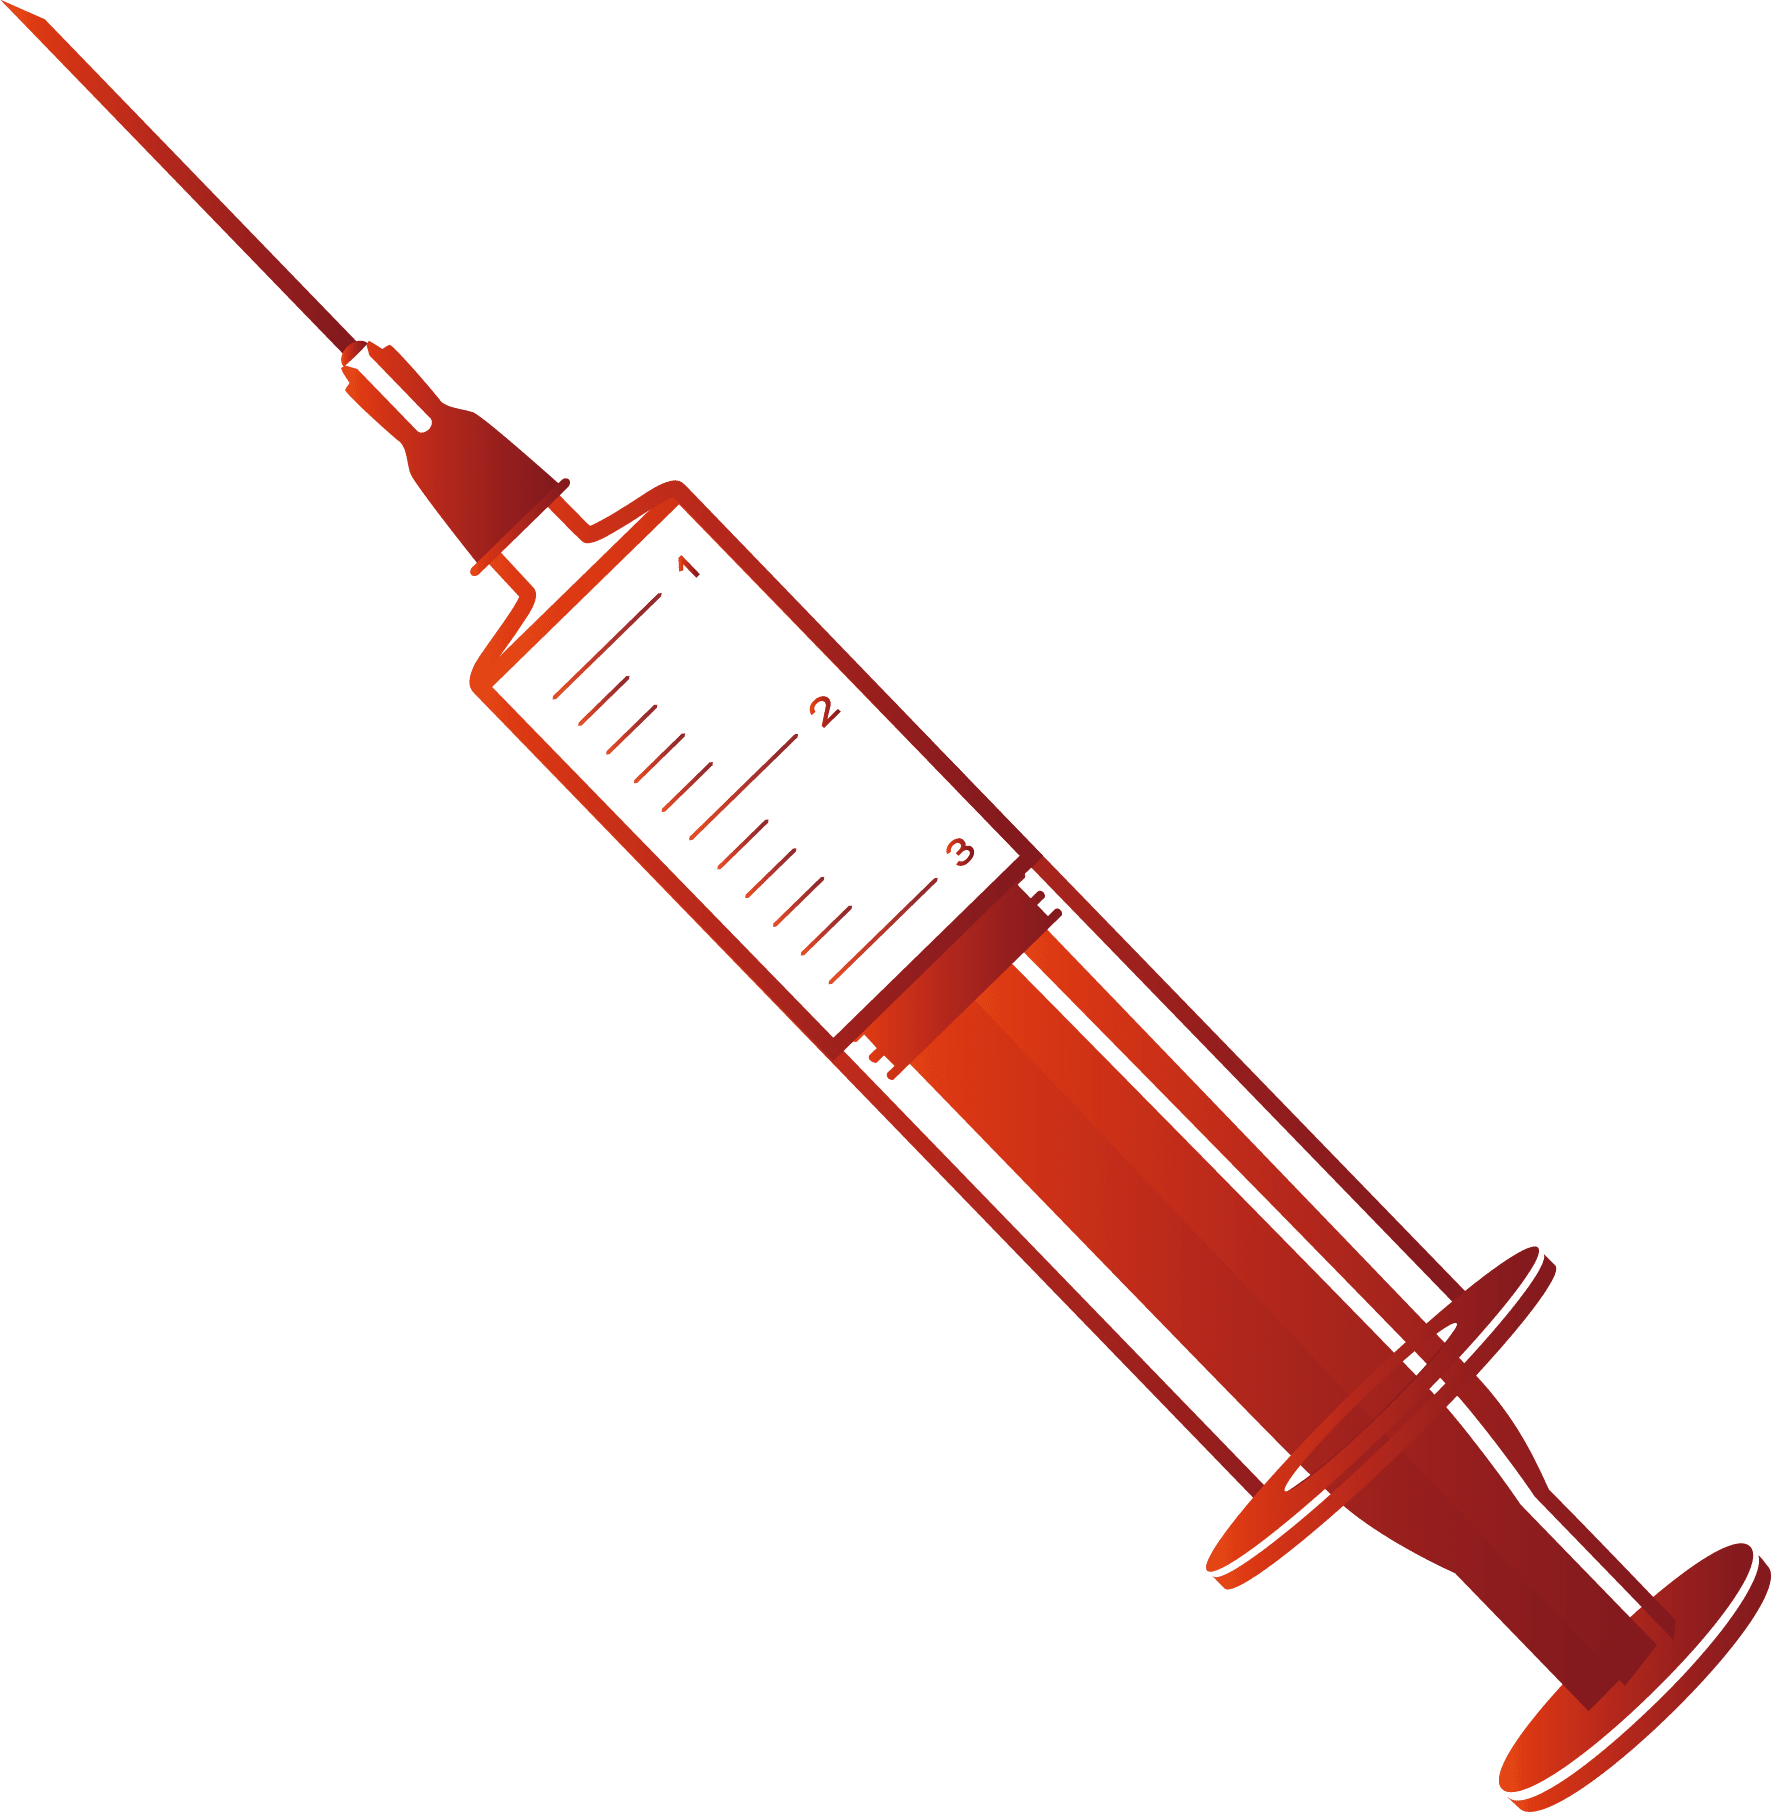 kisspng-red-syringe-gules-red-syringe-5a857cae238514.1140232415186976461455.png